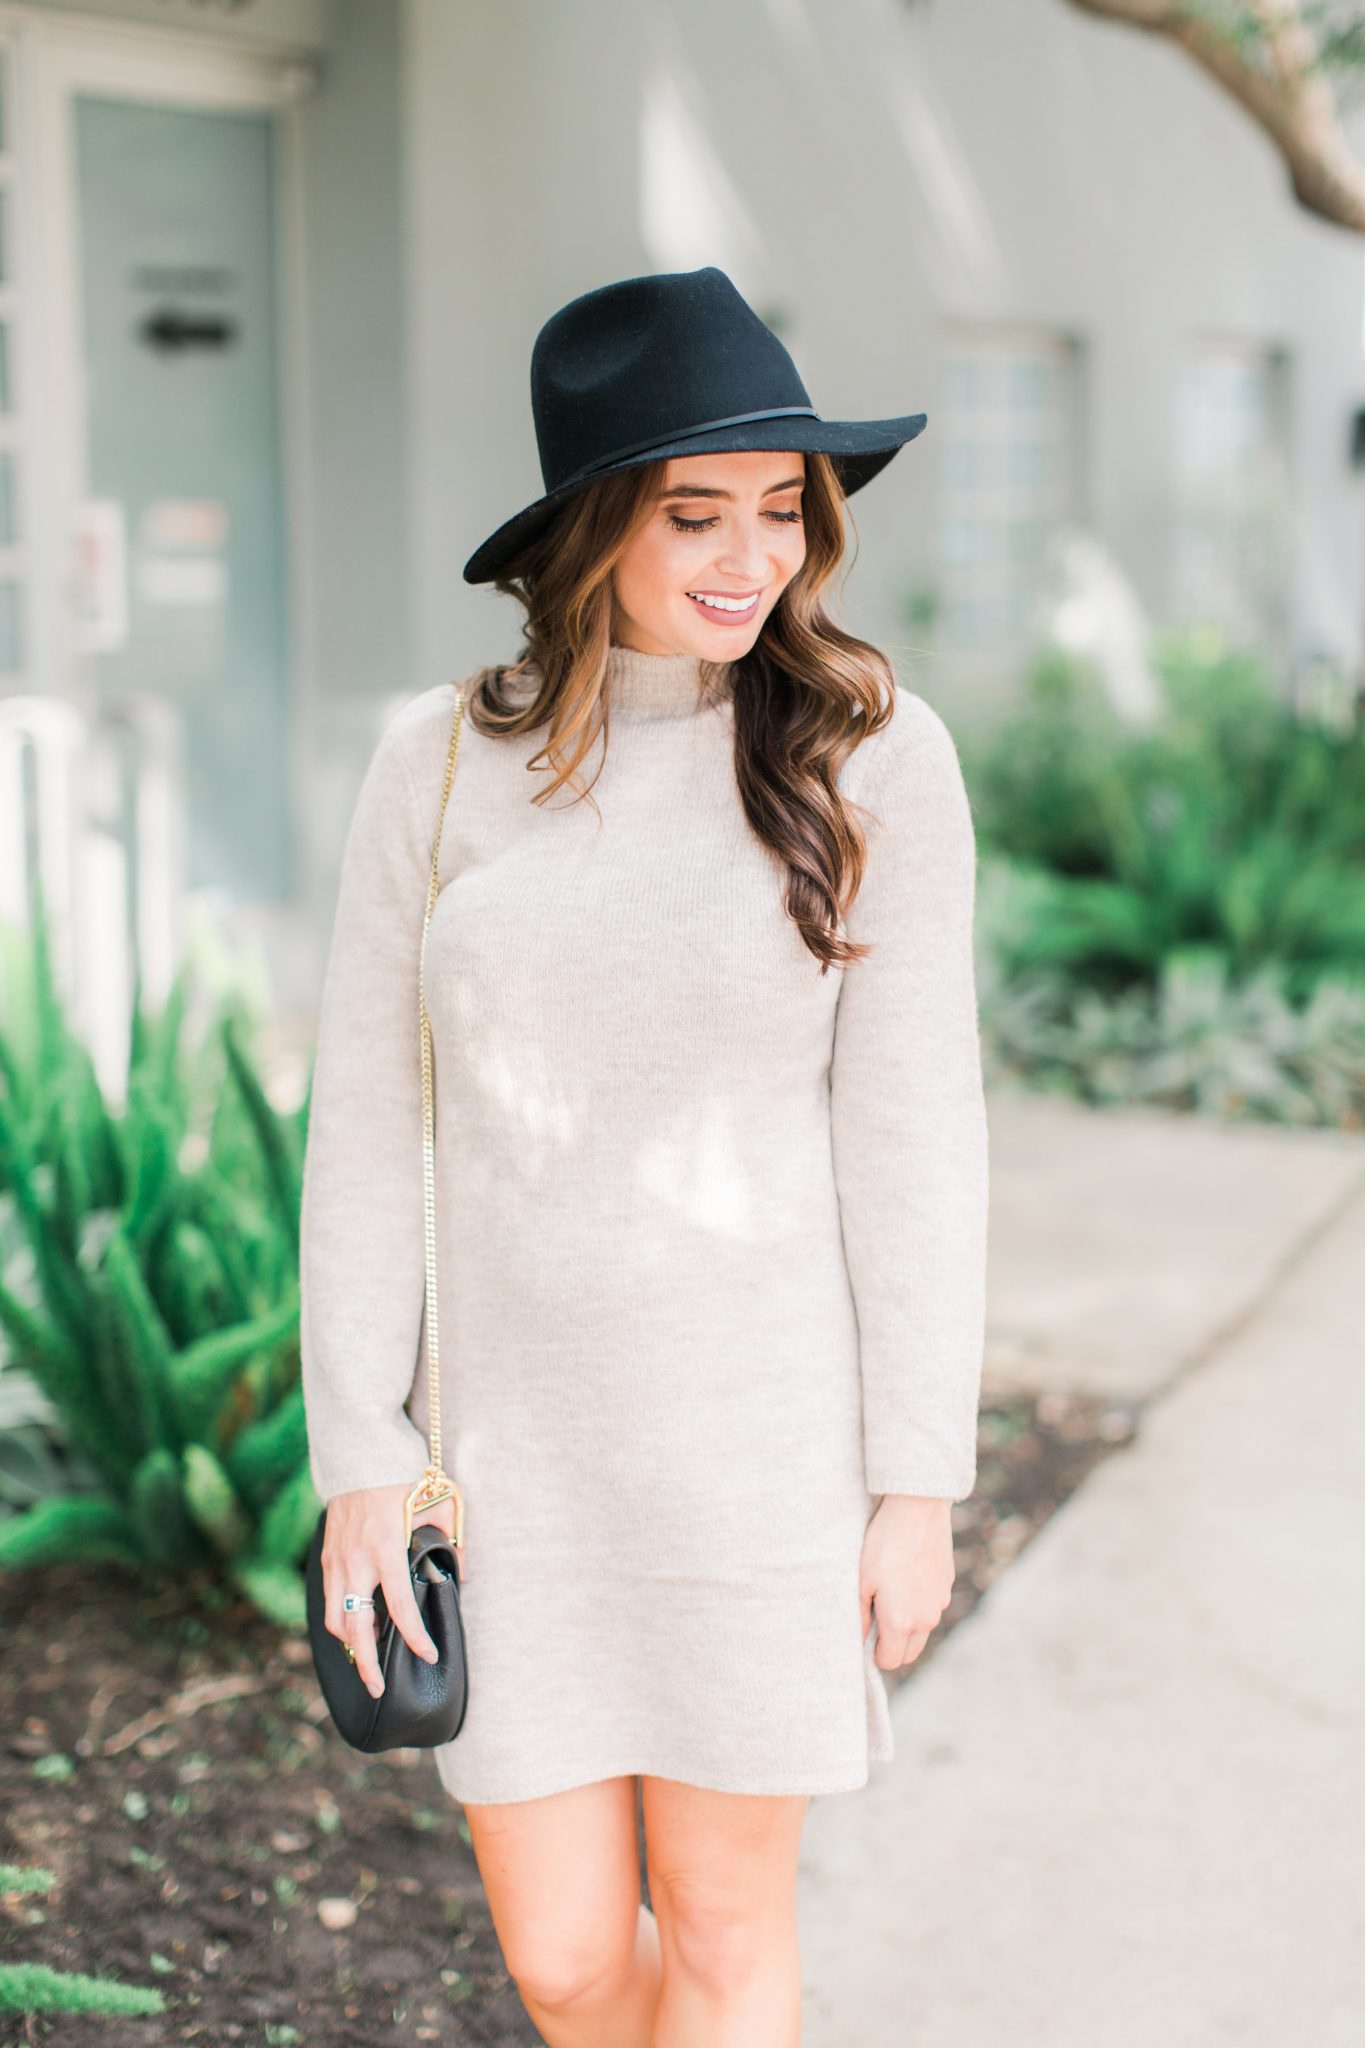 Maxie Elle | Neutral sweater dress with black hat and black booties - Wedding Skin Care Routine by popular Orange County style blogger Maxie Elle